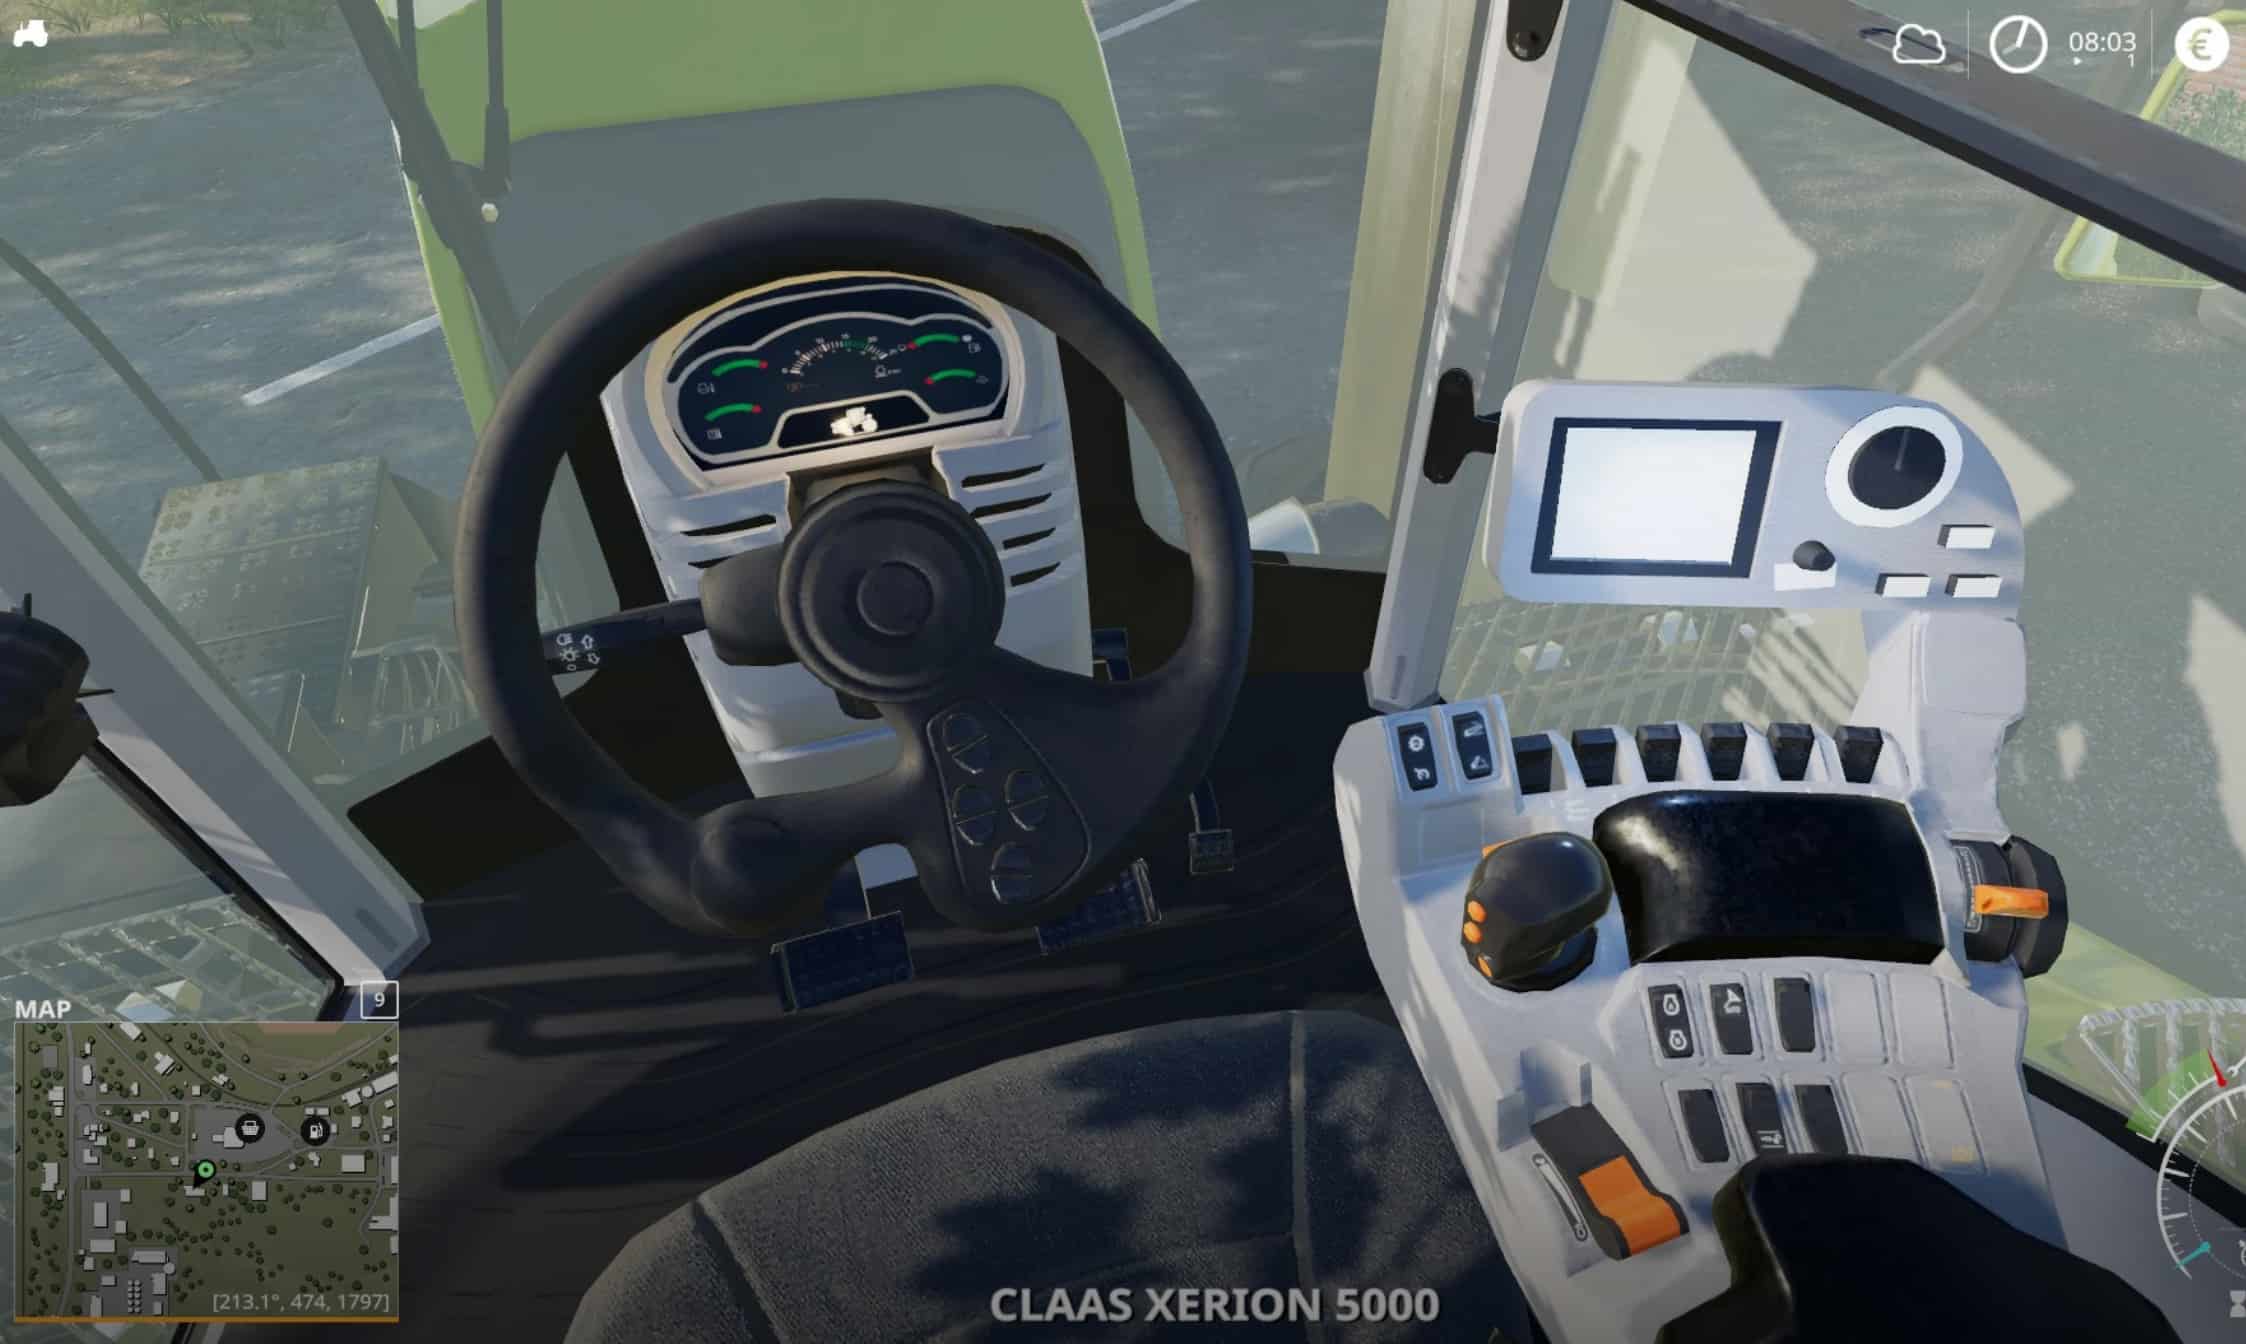 Fs19 Claas Xerion Tracked V1000 Fs 19 Tractors Mod Download 6402